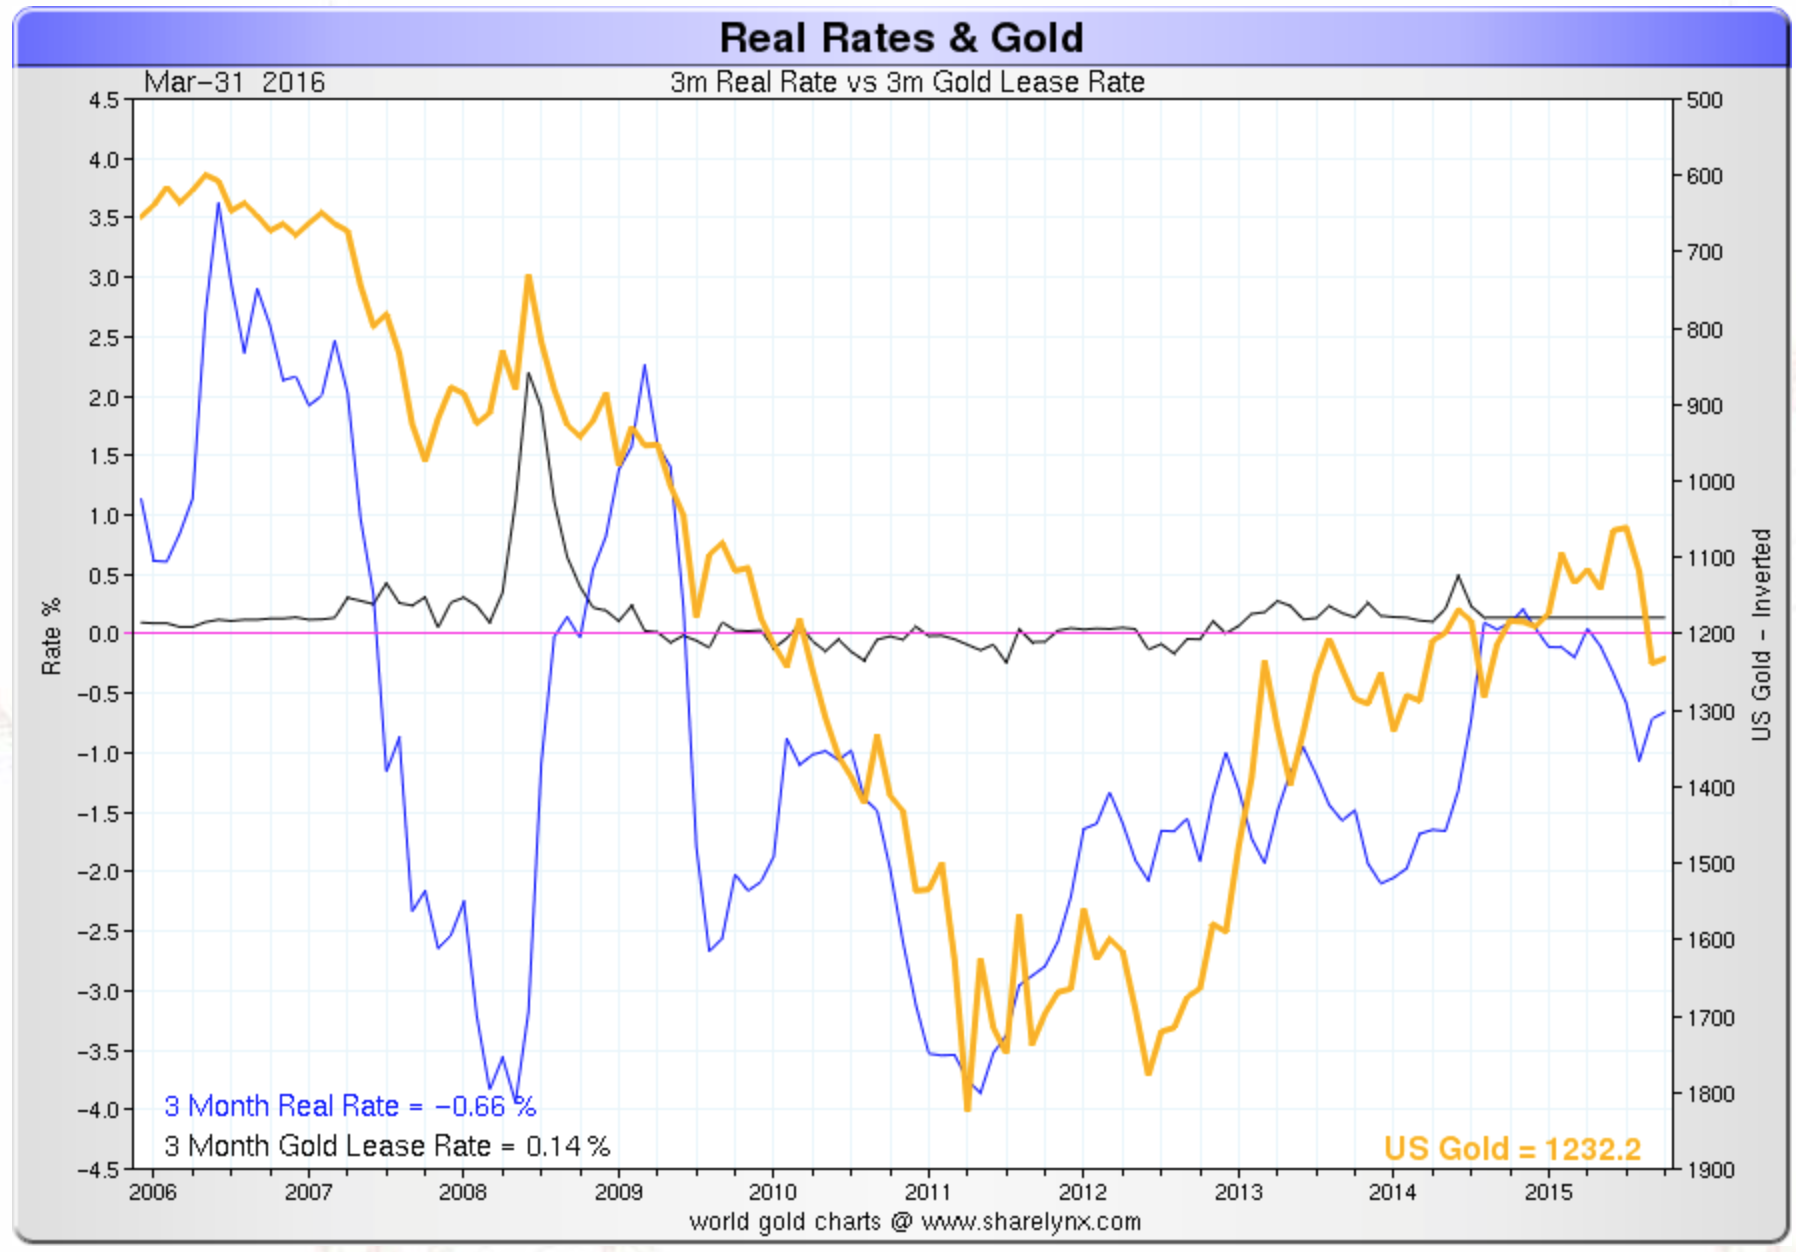 3 motnhs real rates & gold since 2006